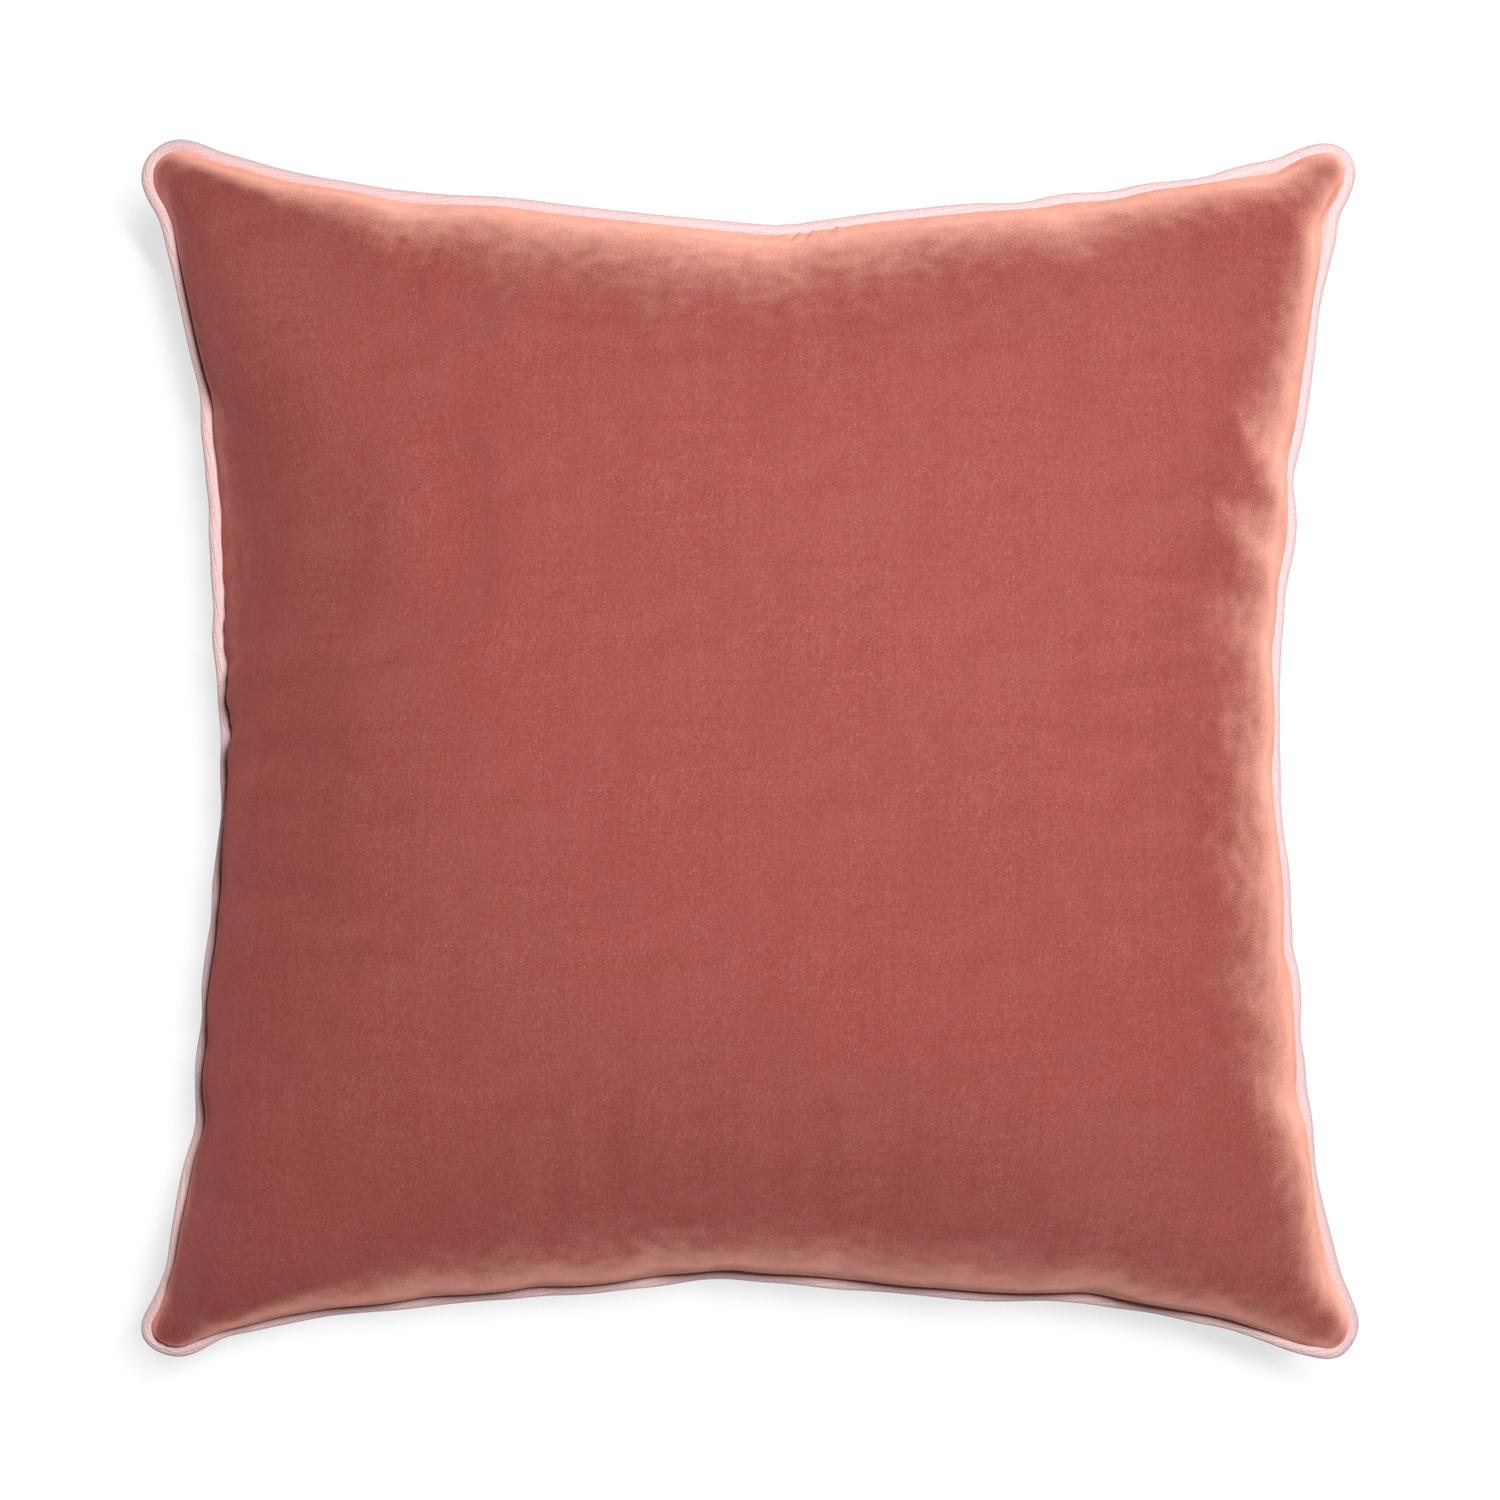 Euro-sham cosmo velvet custom coralpillow with petal piping on white background